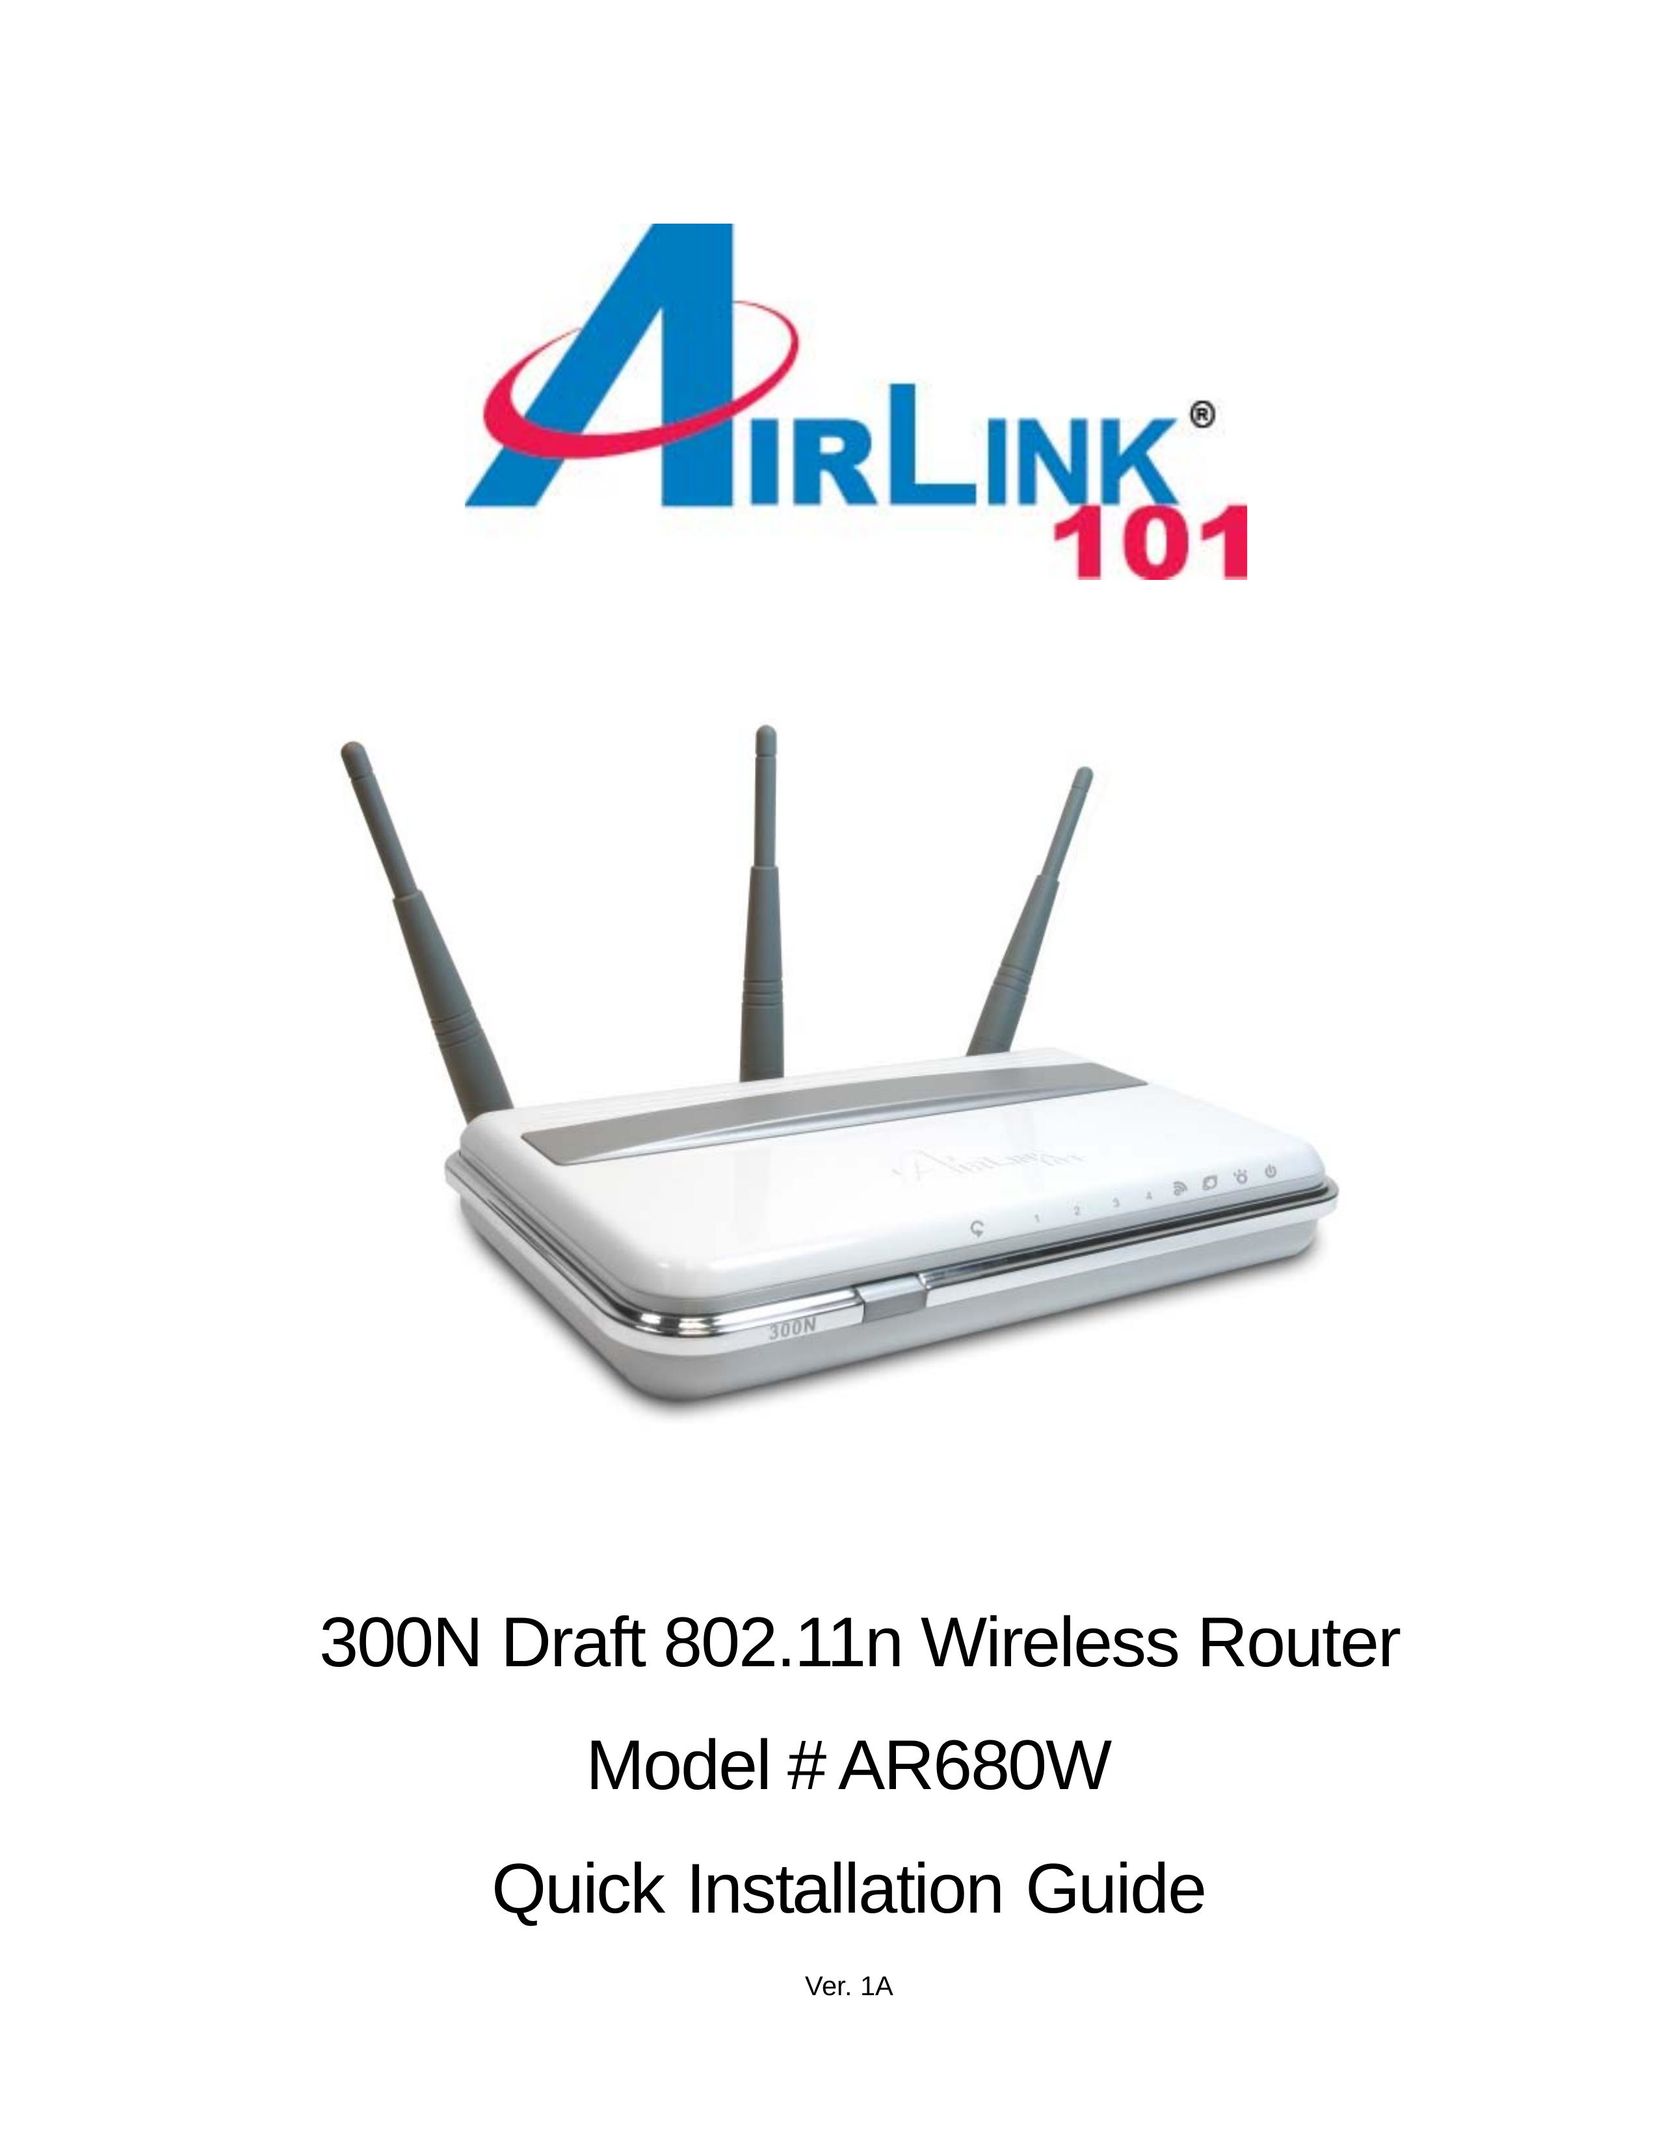 Airlink101 AR680W Network Router User Manual